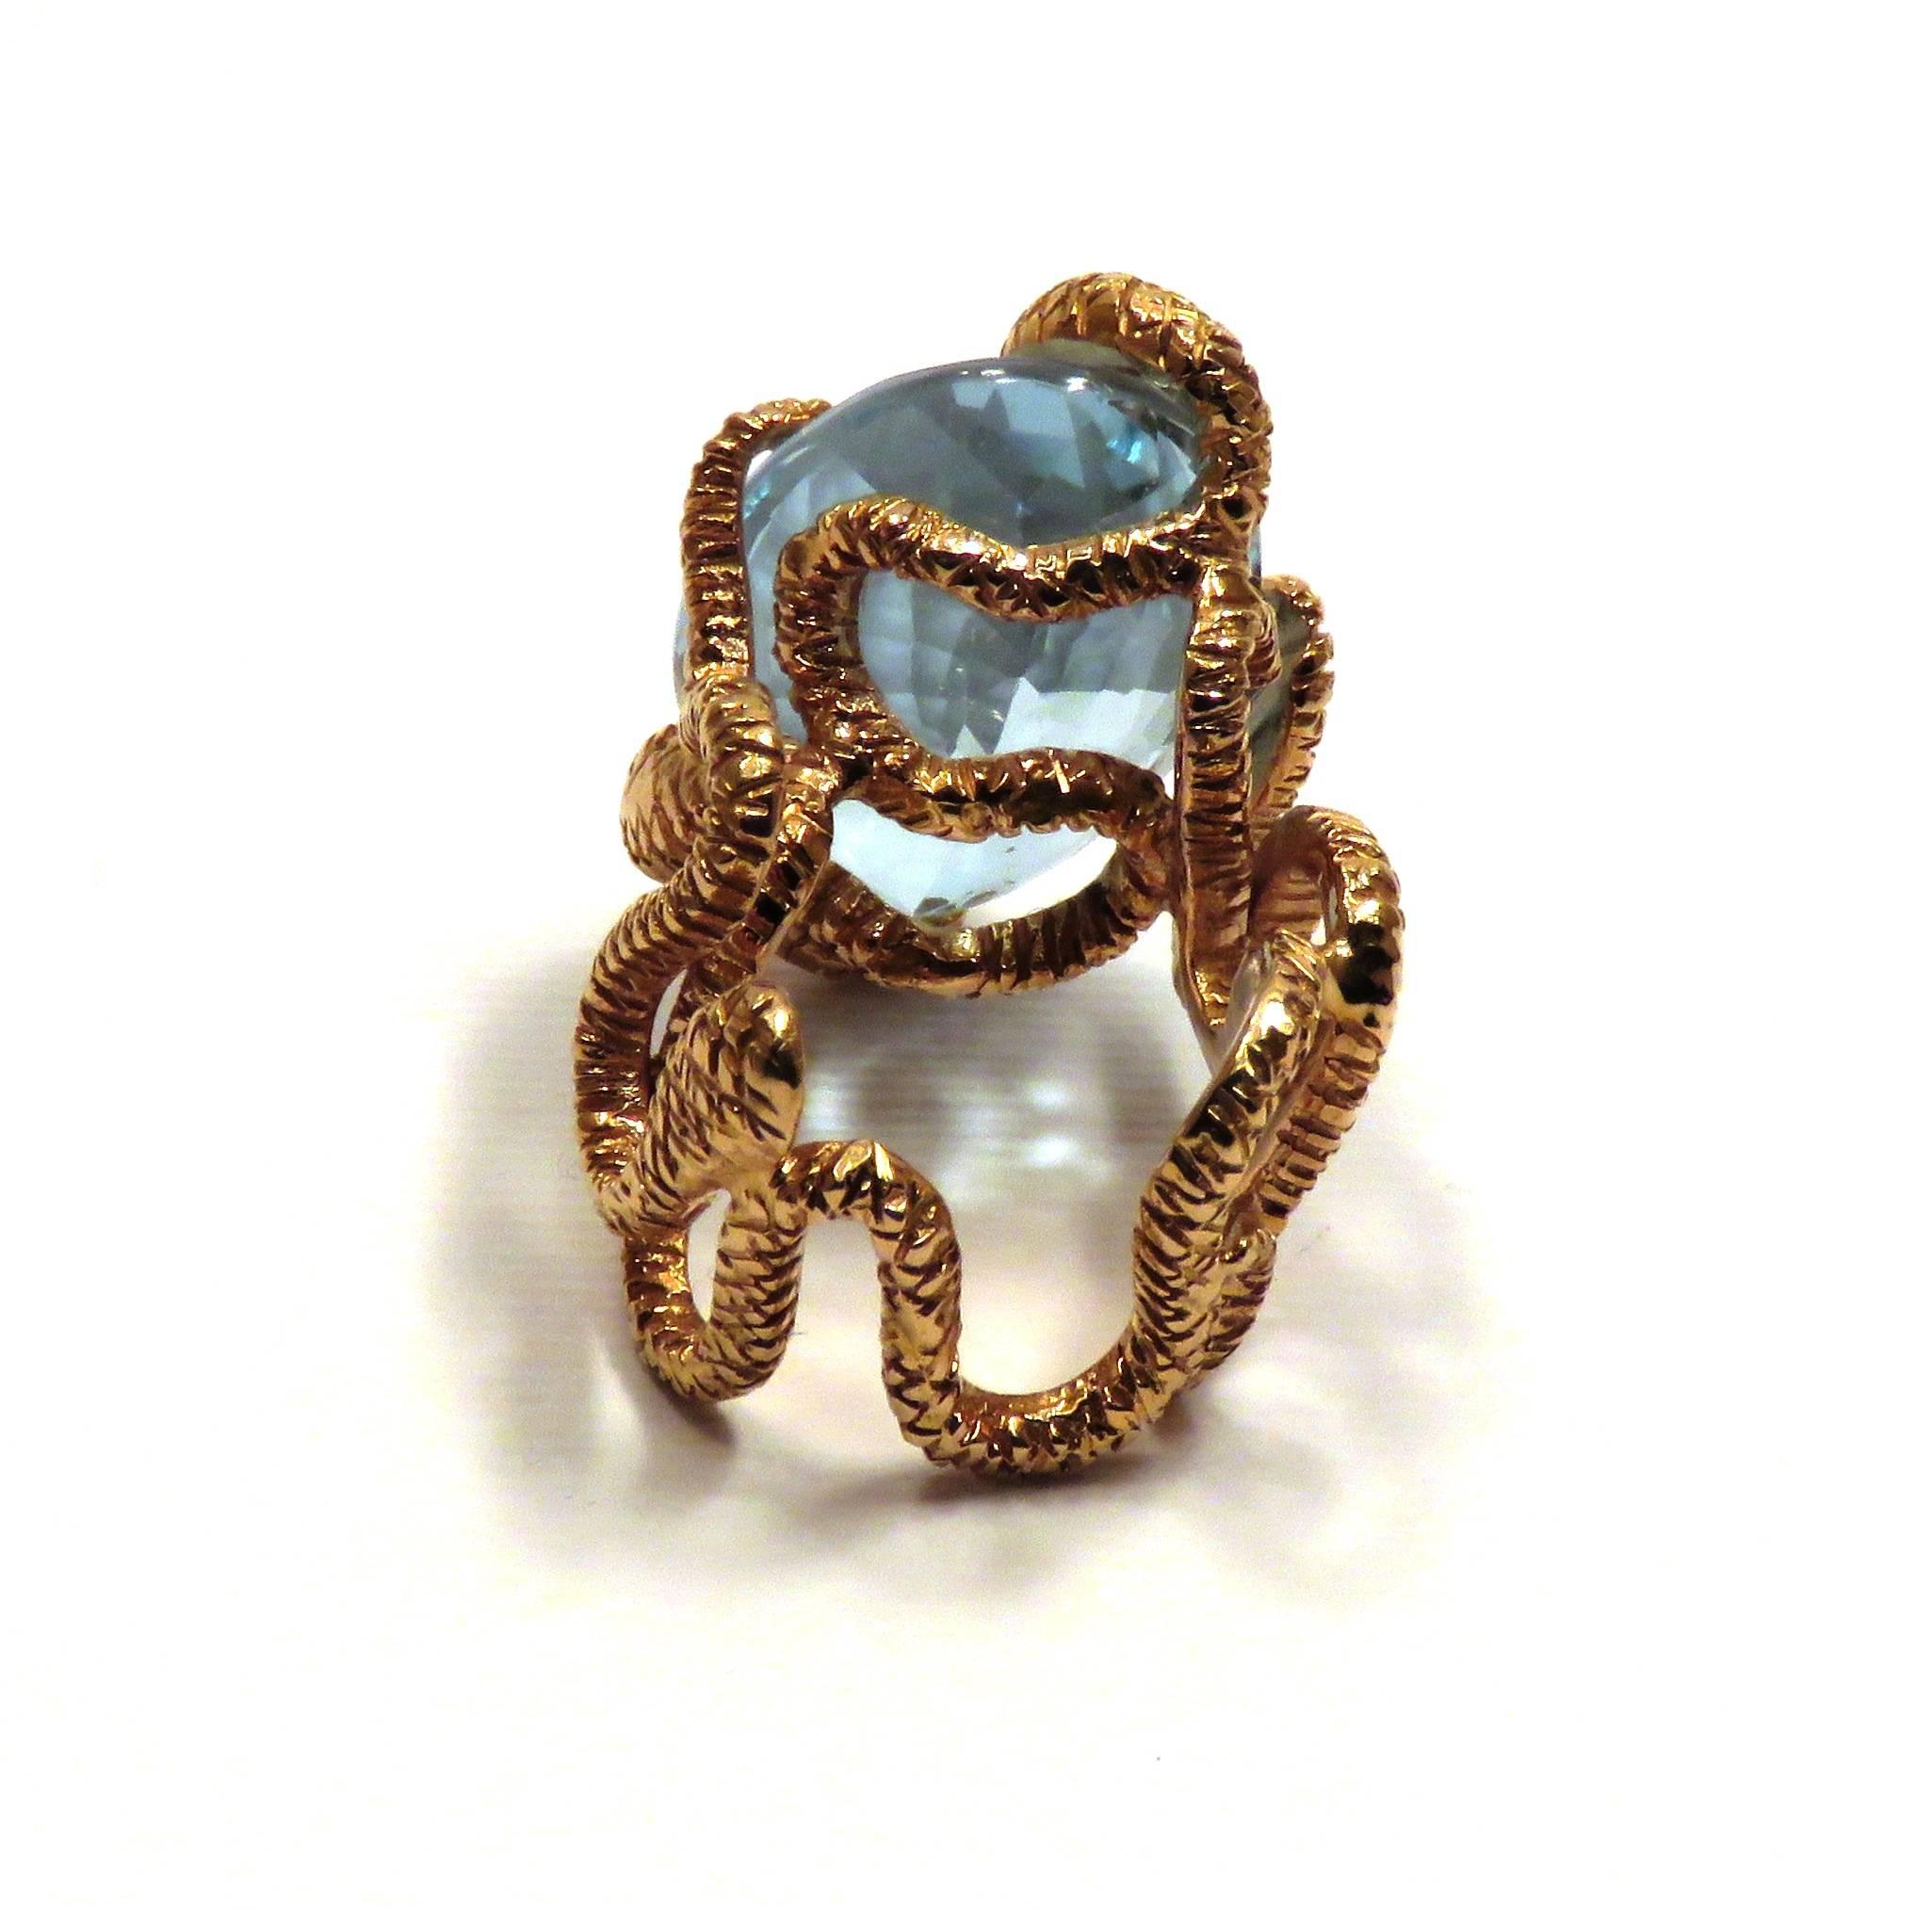 Women's Rose Gold Blue Topaz Cocktail Statement Ring Handcrafted in Italy Botta Gioielli